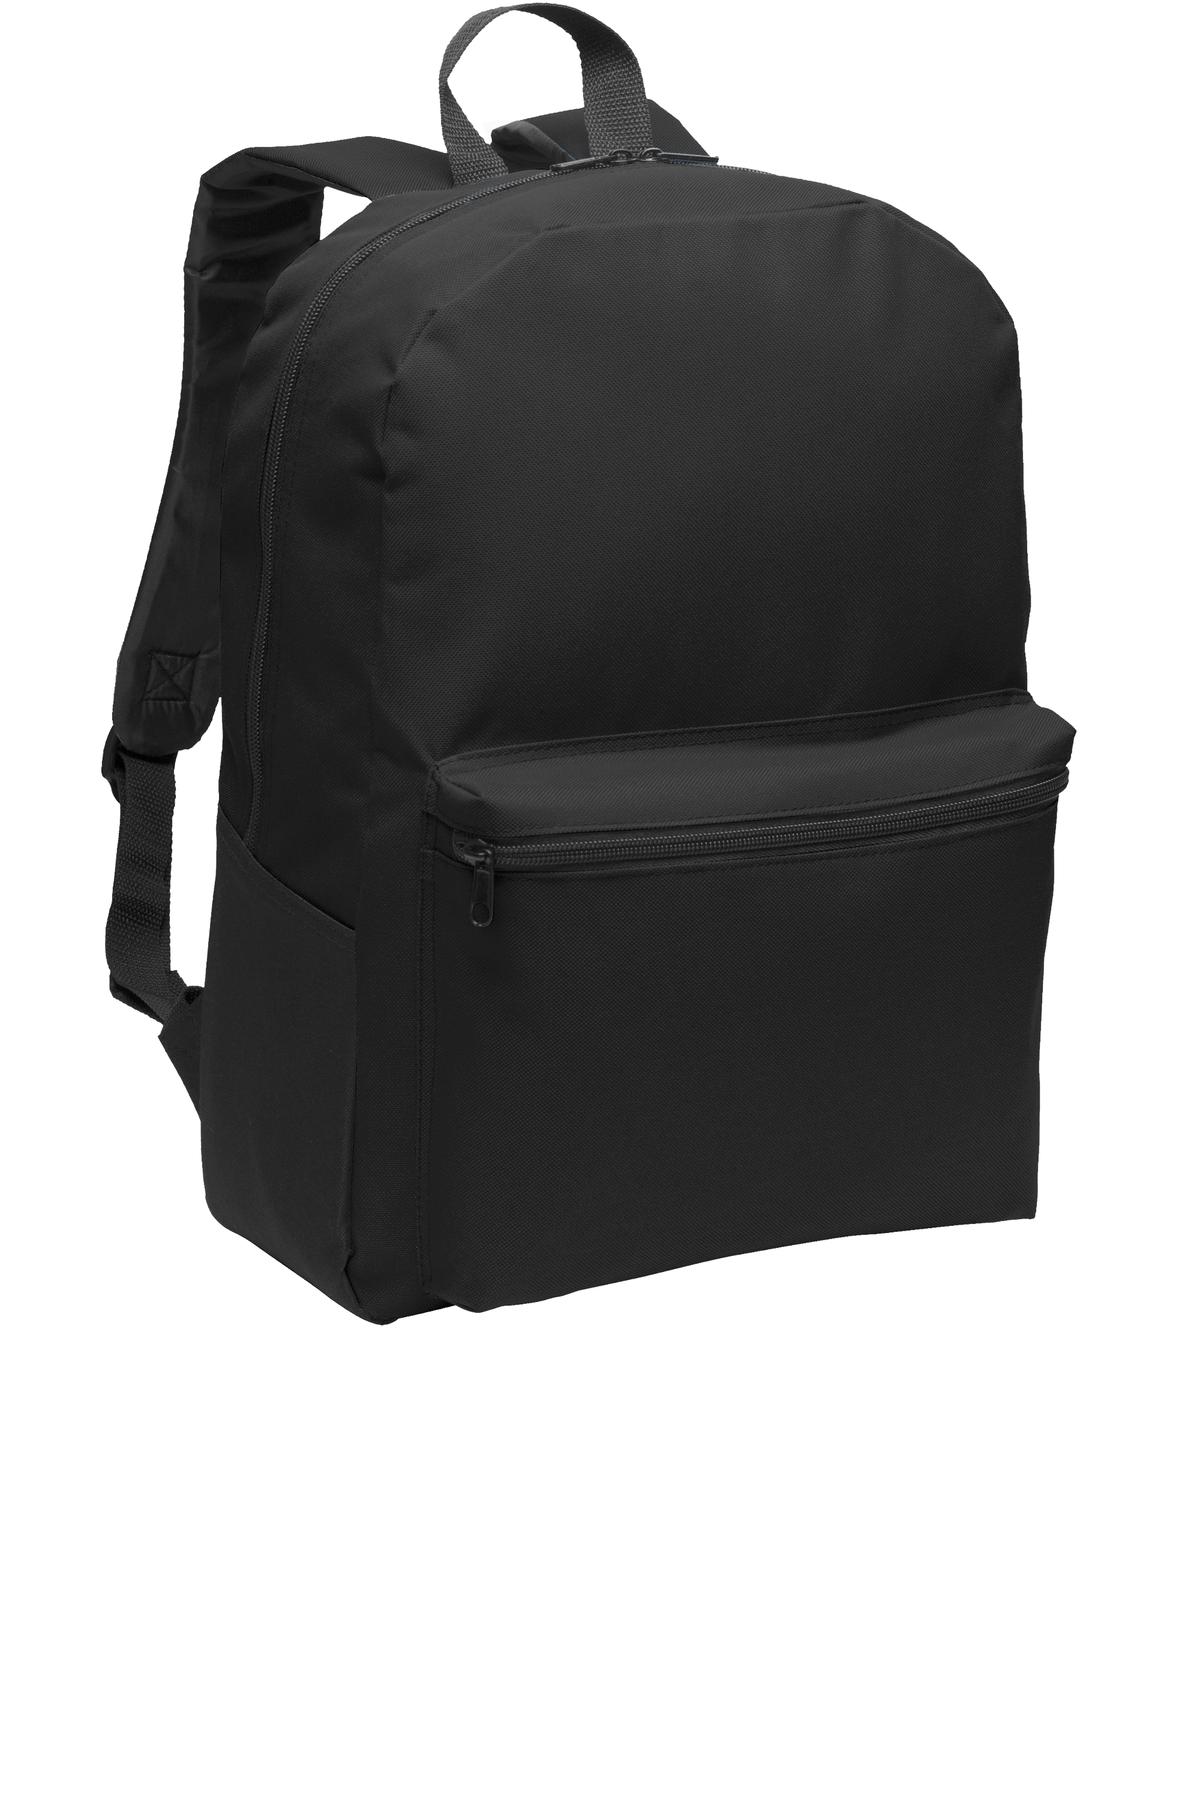 Port Authority Hospitality Bags ® Value Backpack.-Port Authority